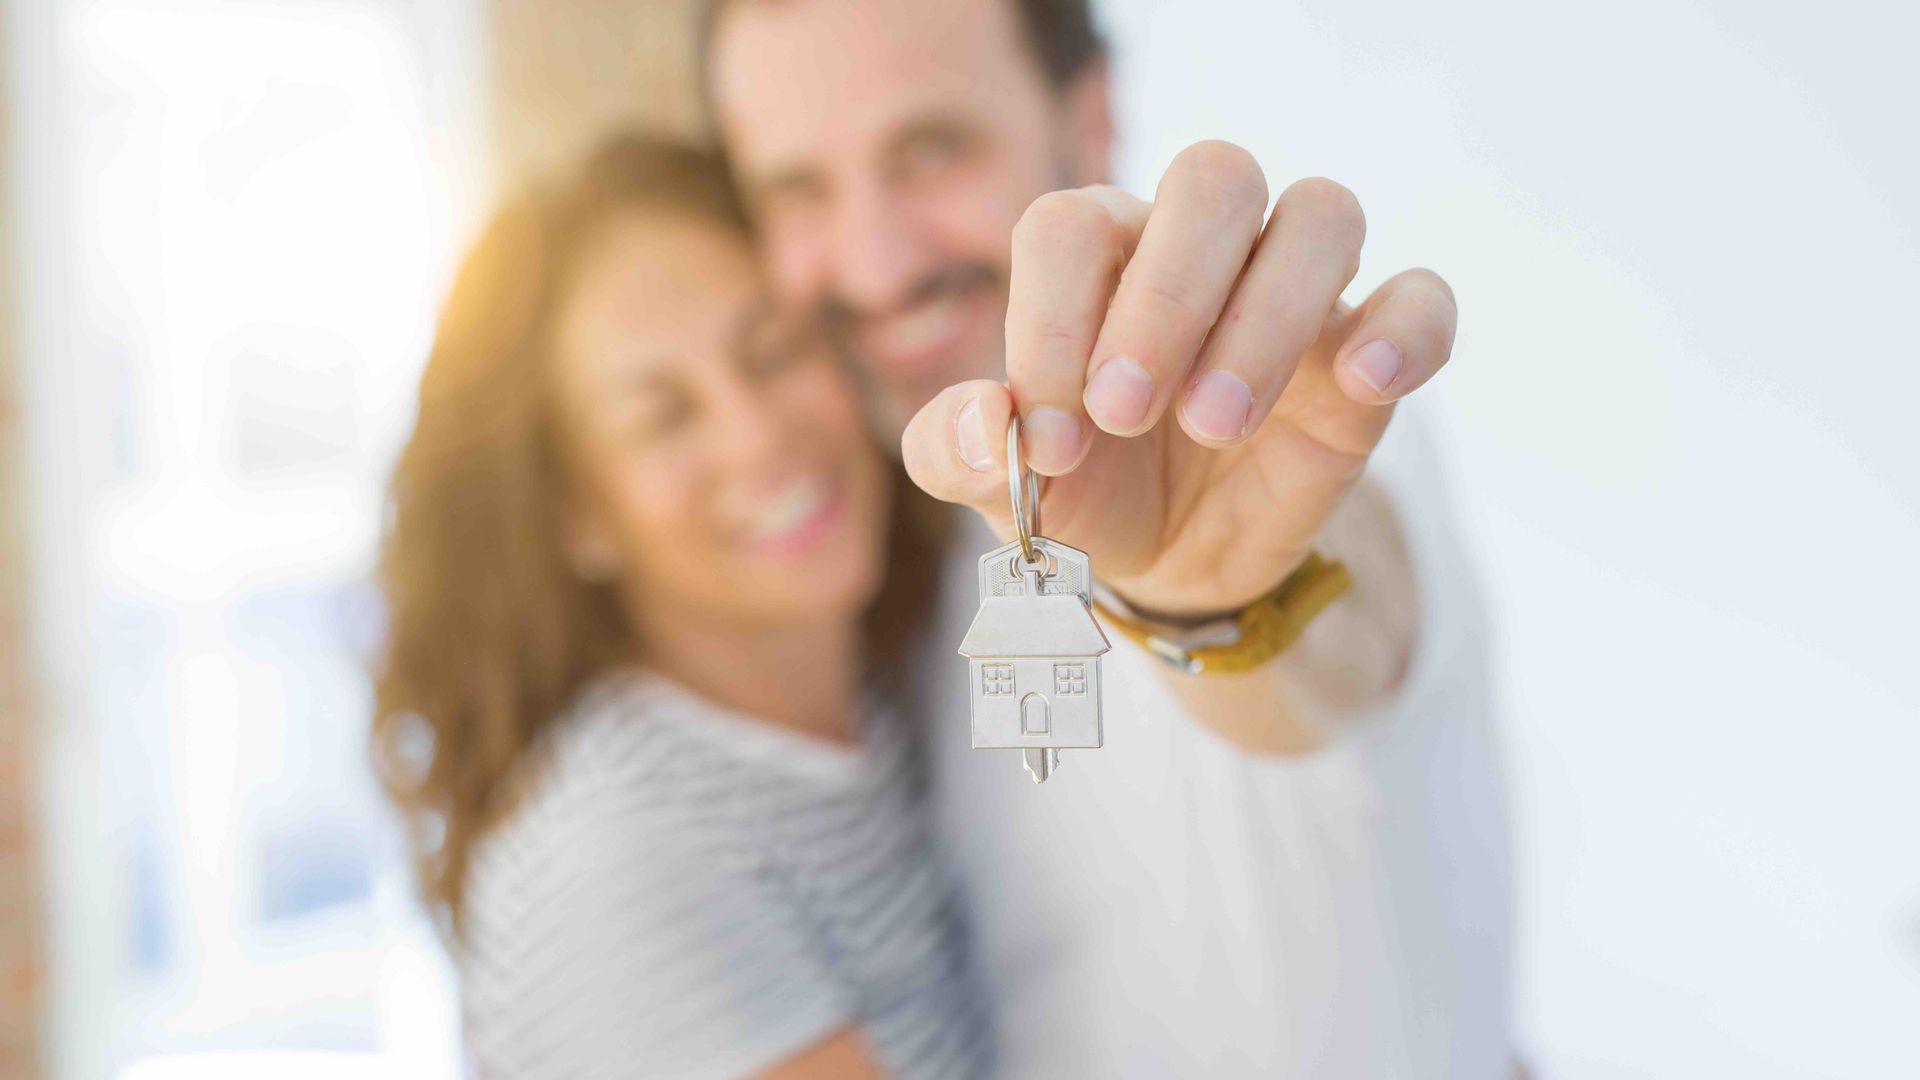 a man is holding a house key in front of a woman.